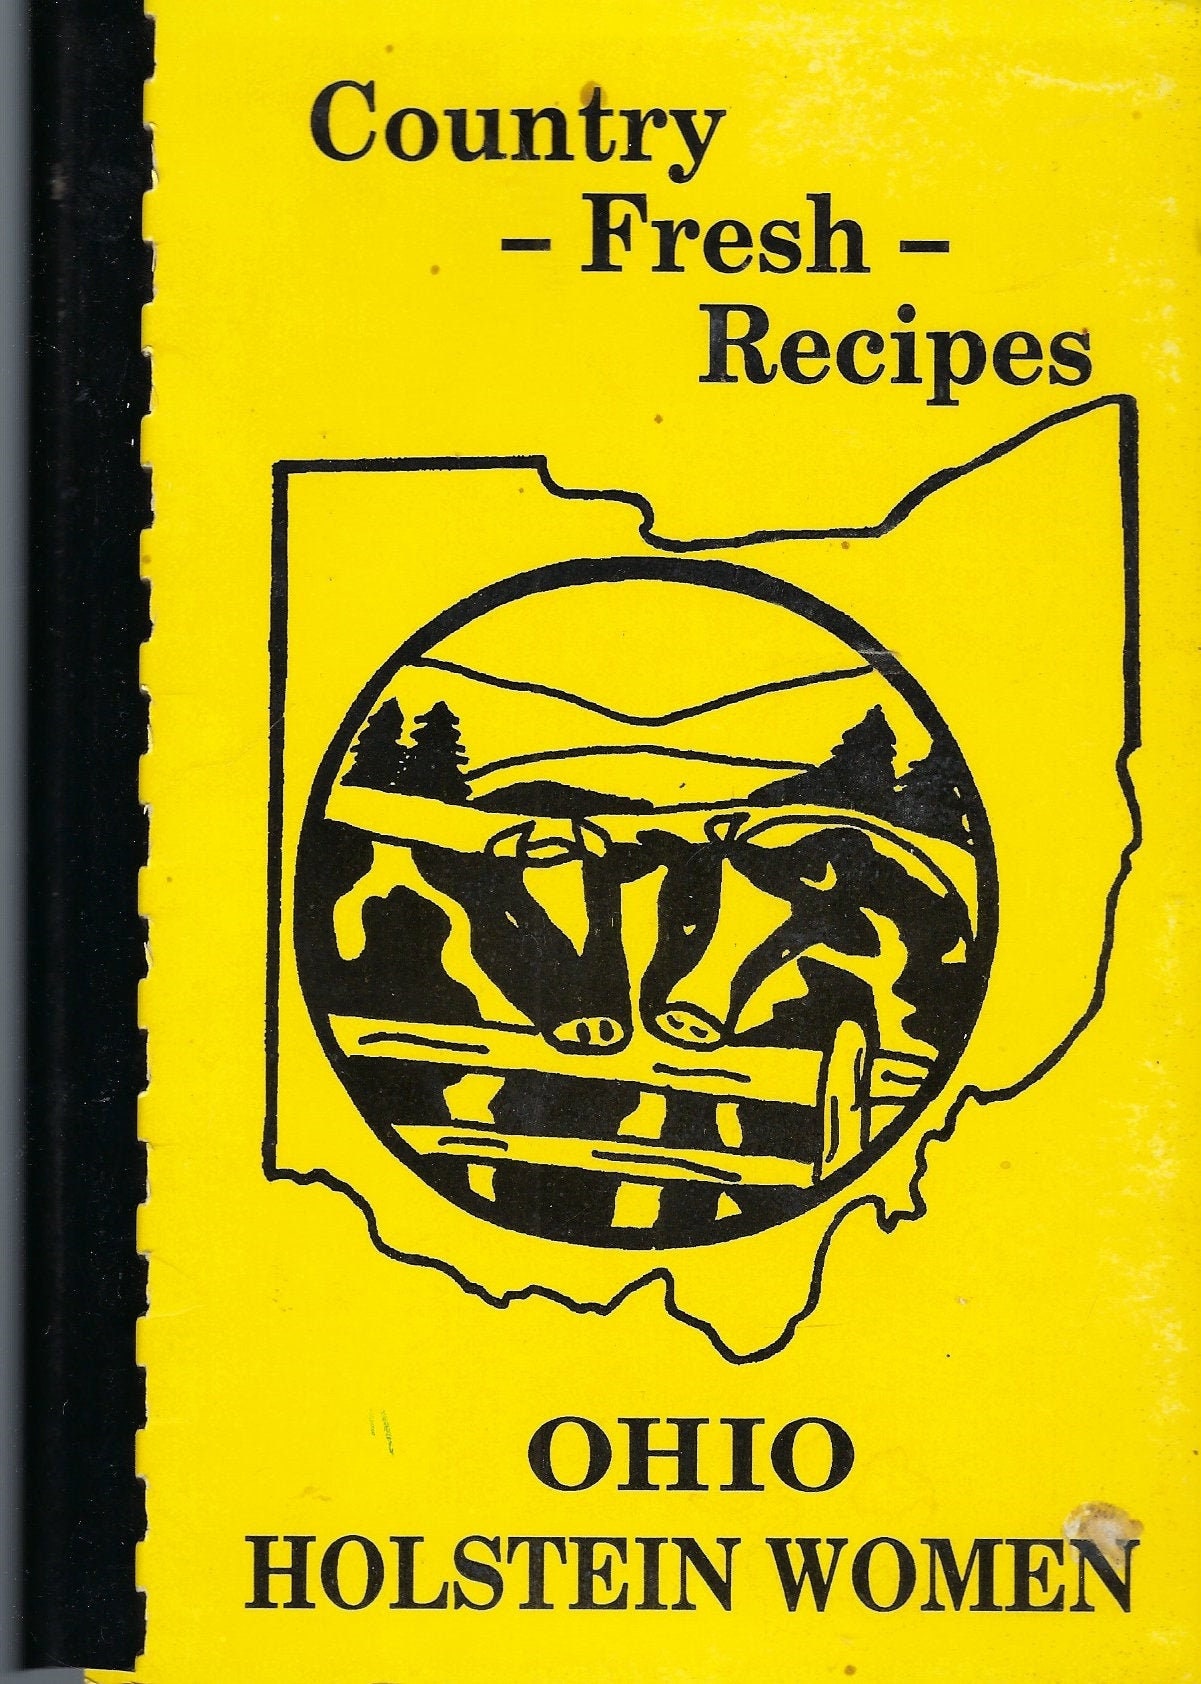 Columbus Oh Vintage 1991 Ohio State-Wide Holstein Cattle Women Country Fresh Recipes Cookbook Community Favorites Collectible Spiral Bound